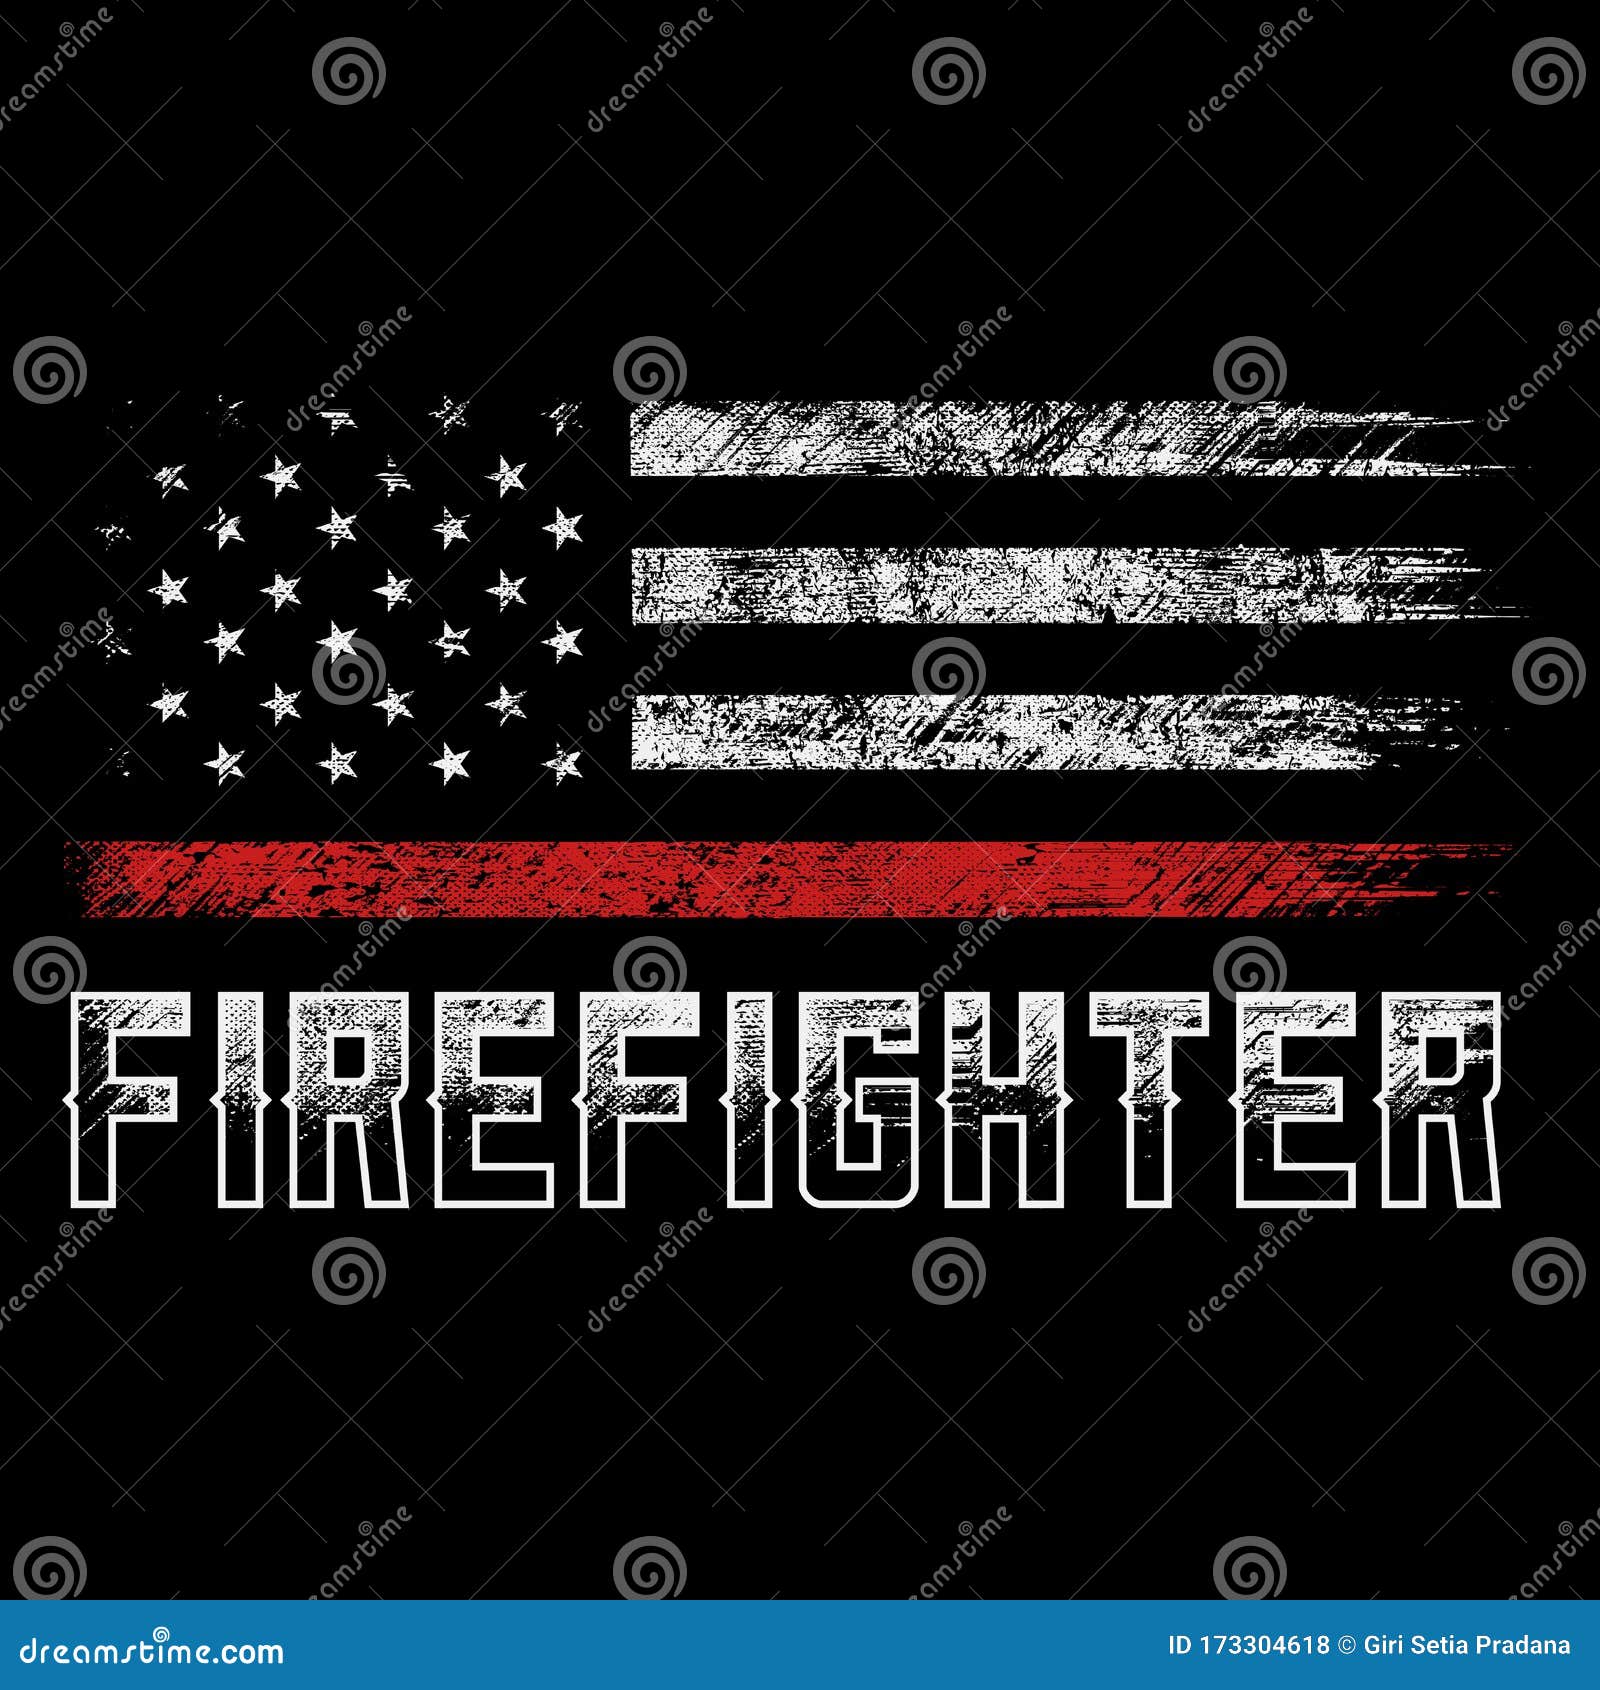 Firefighter flag Stock Photos Royalty Free Firefighter flag Images   Depositphotos